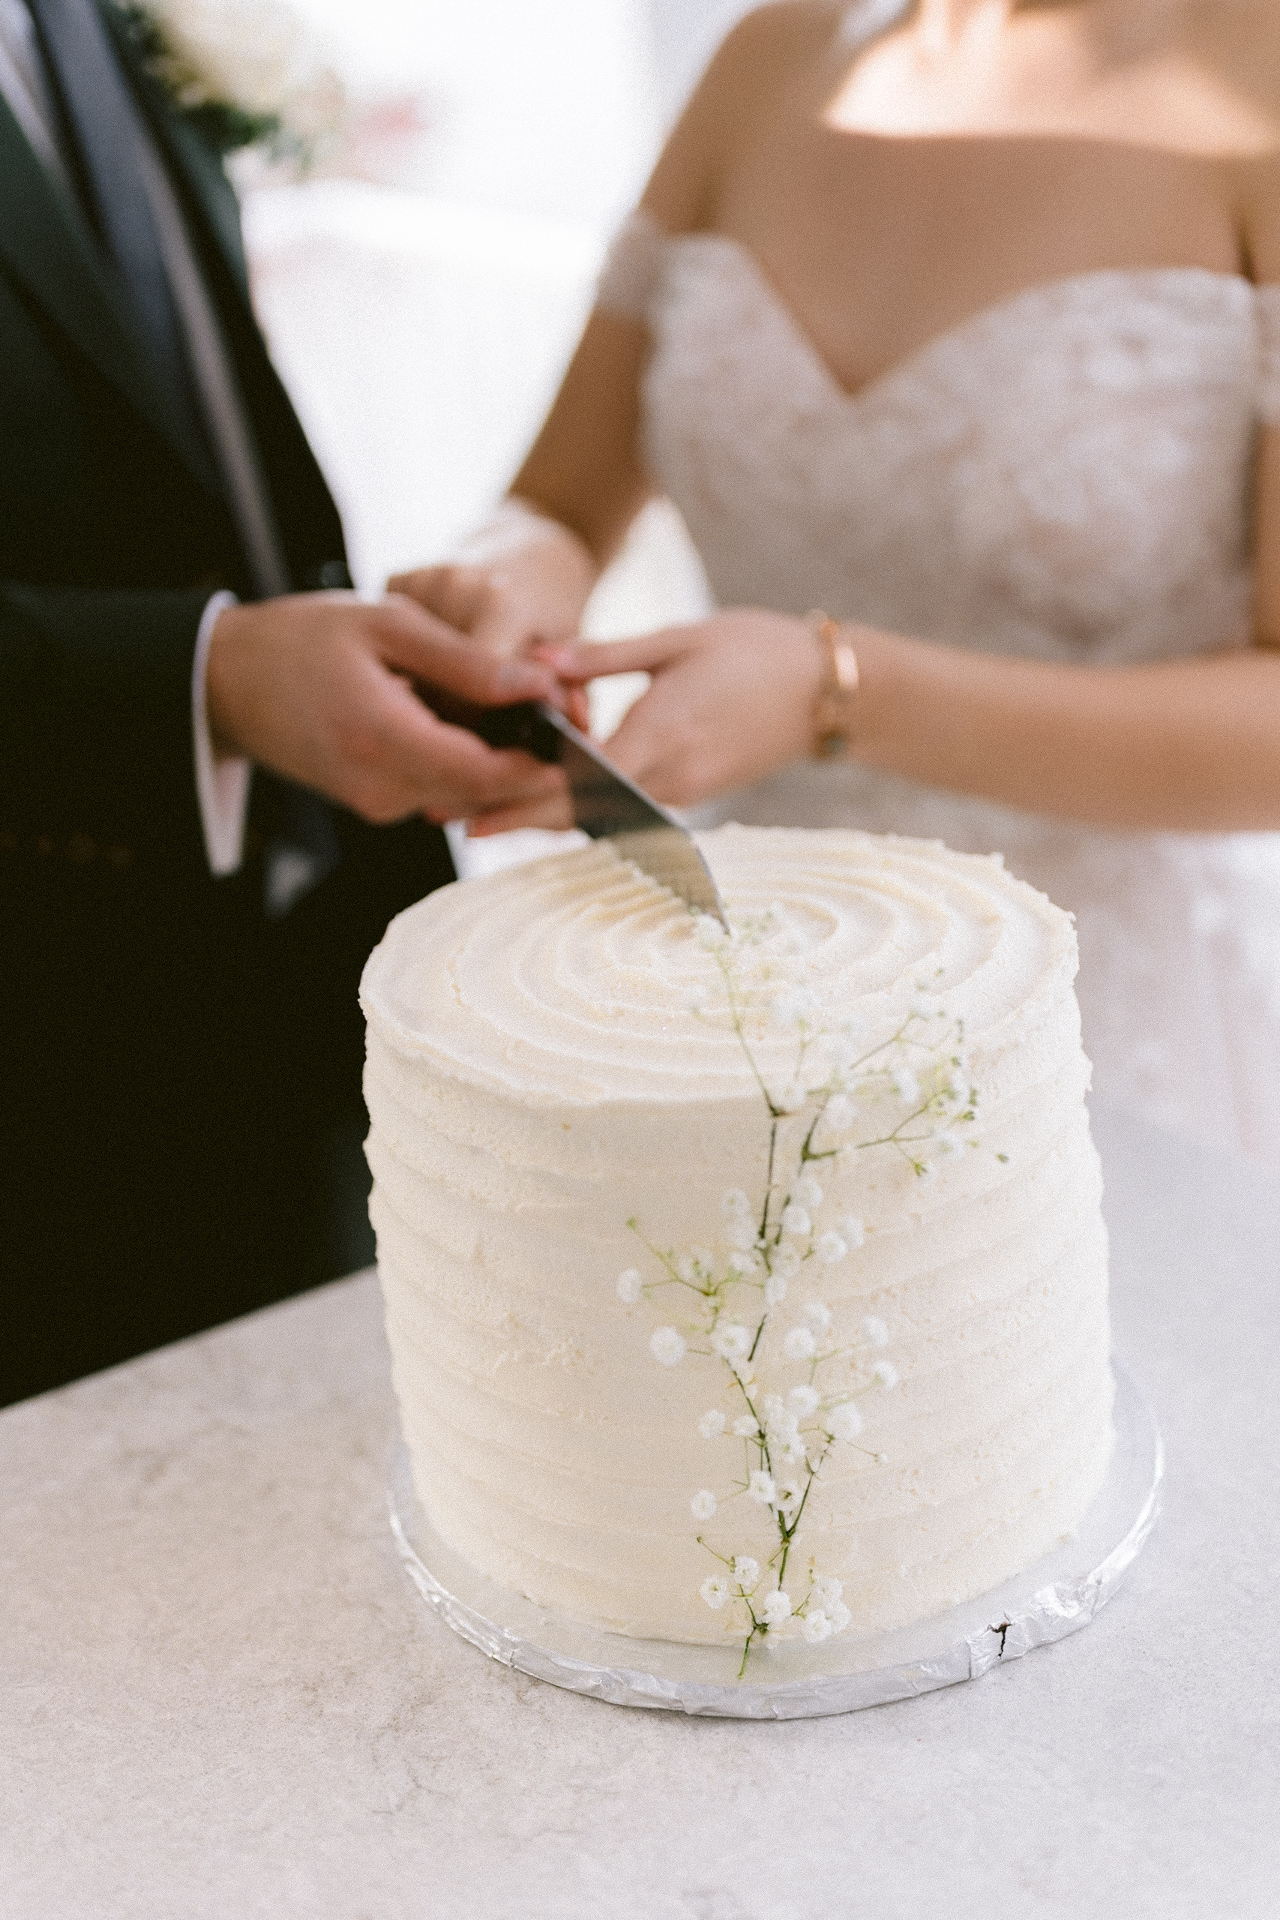 A bride and groom cutting a white wedding cake adorned with small flowers